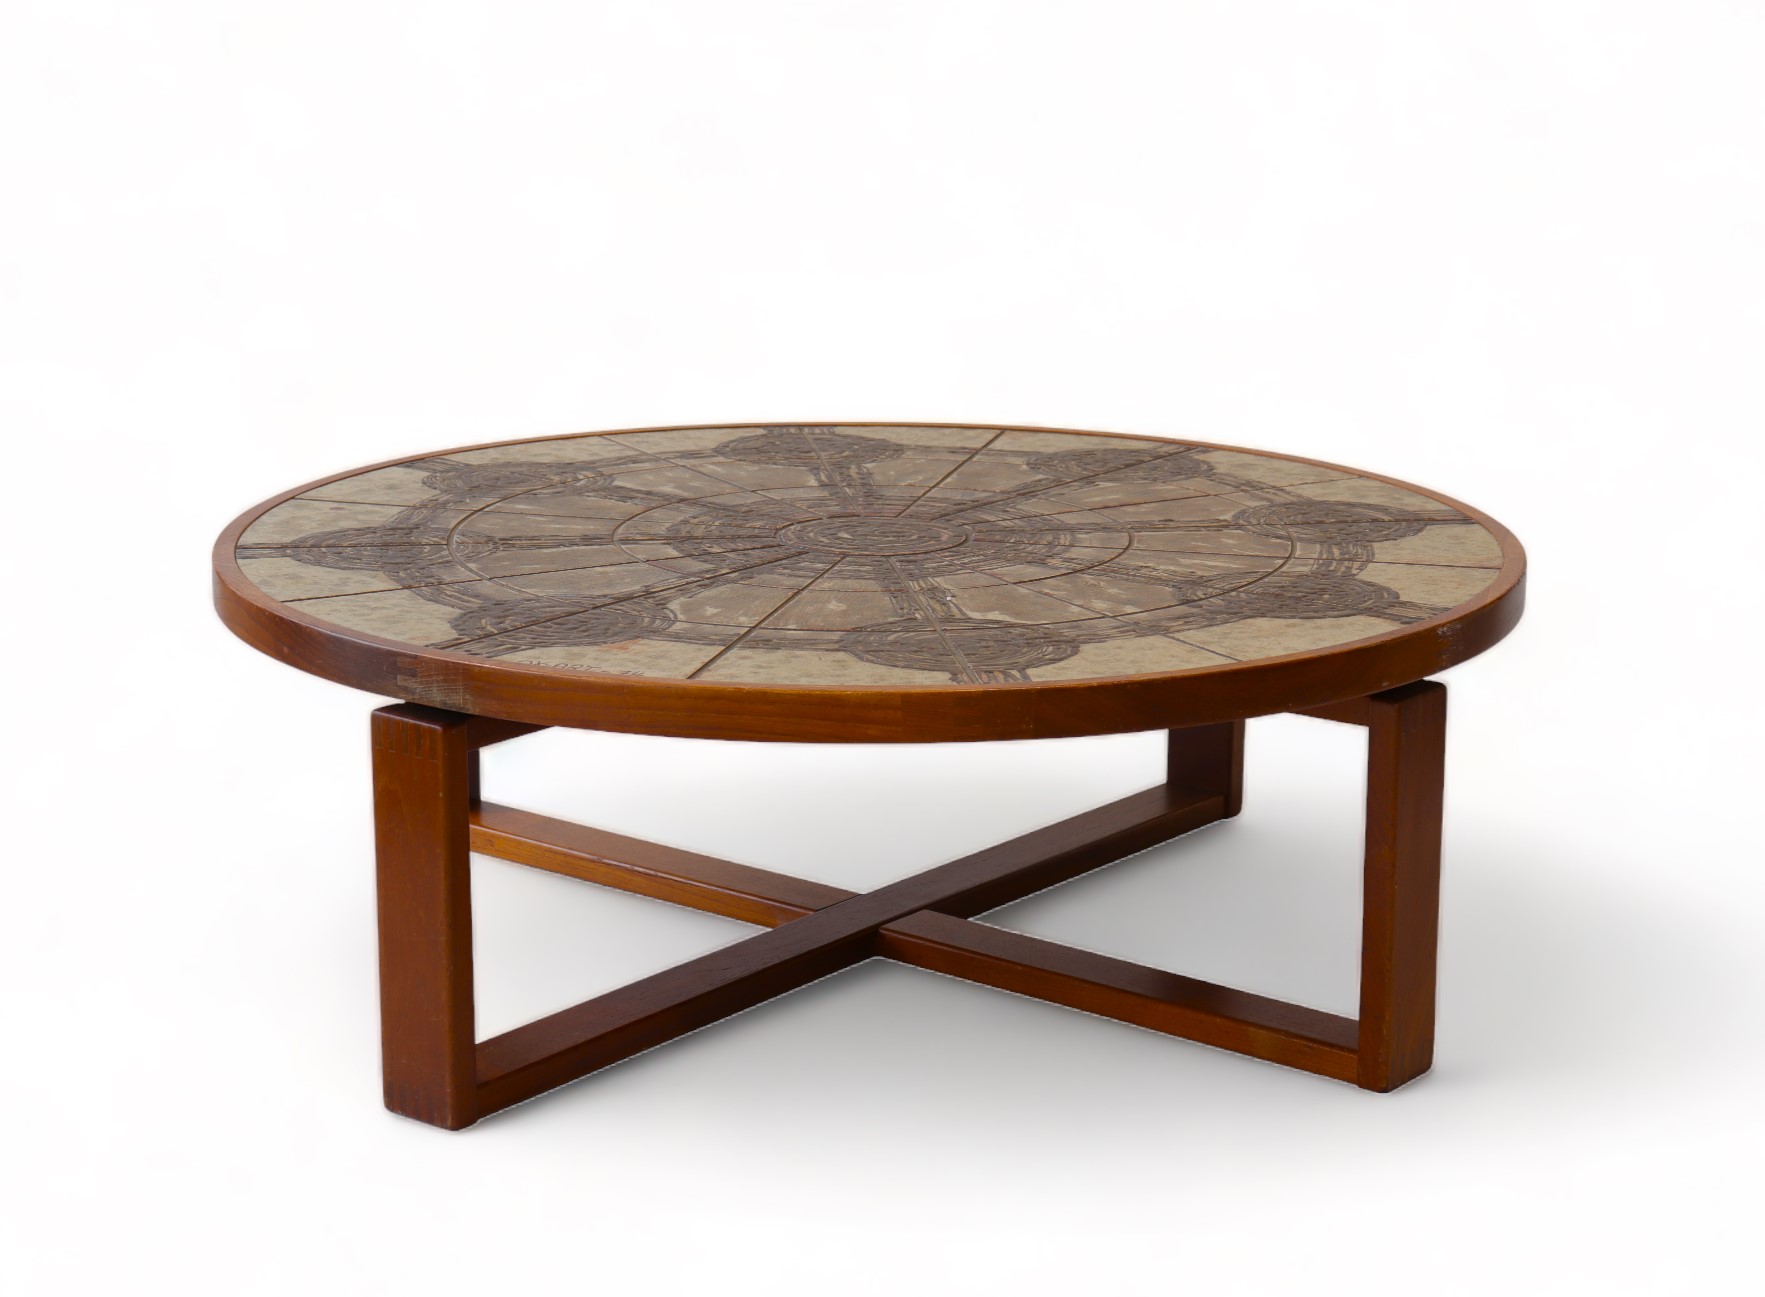 Ox-Art coffee table with wooden base and abstract ceramic plate top decorated with geometric pattern - Image 3 of 3